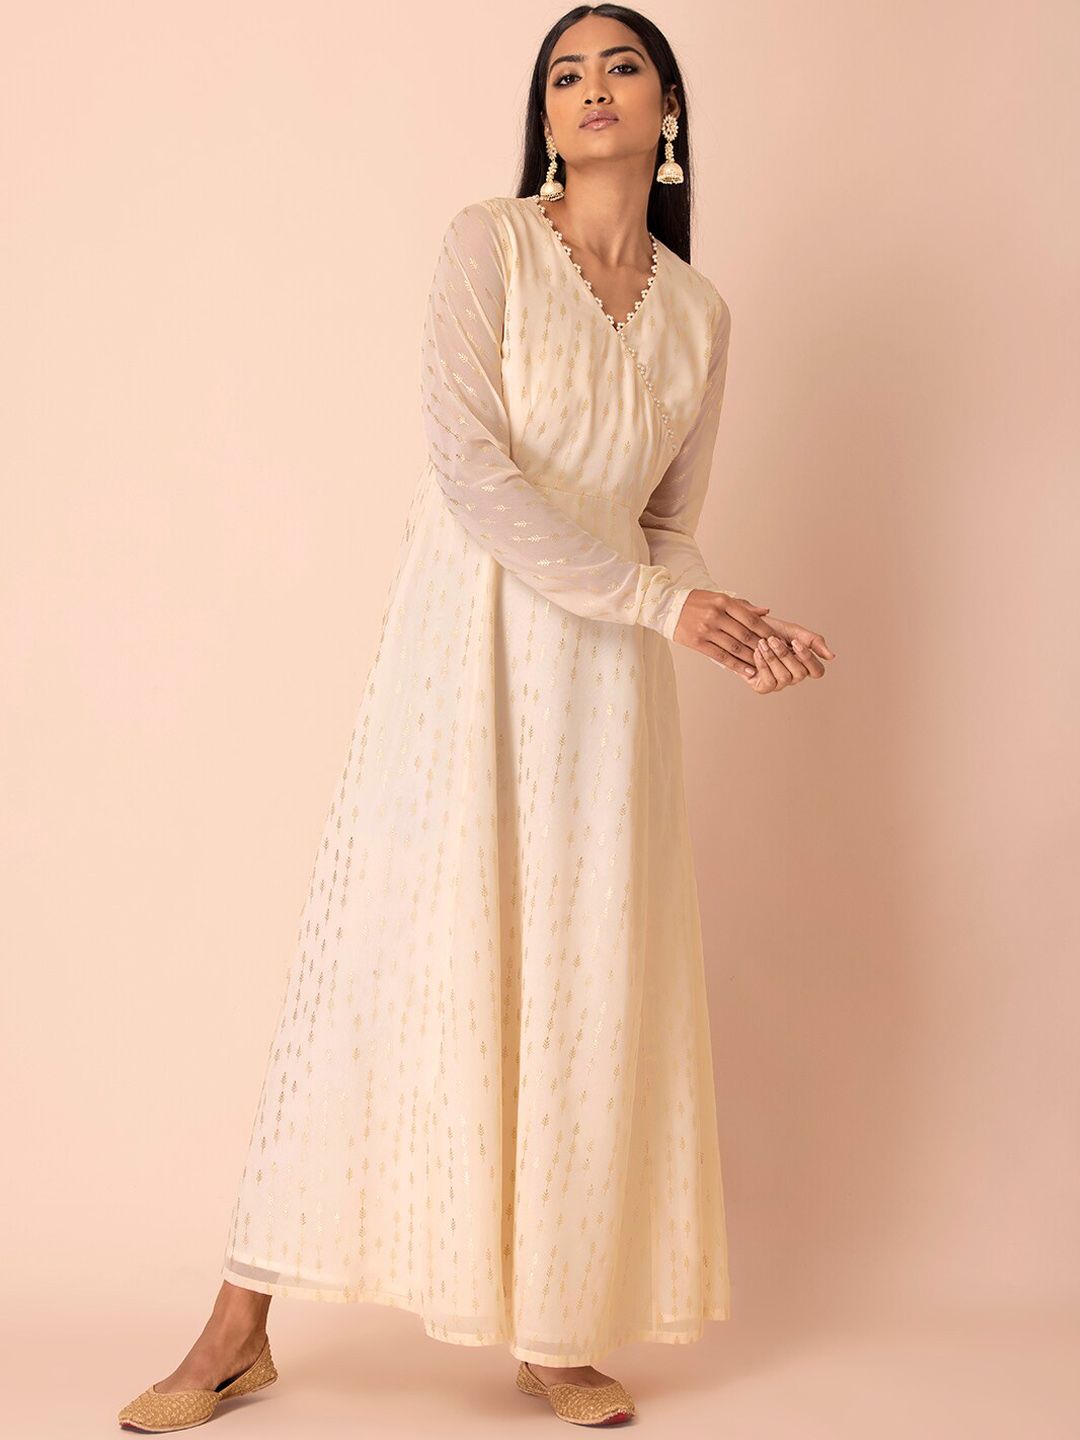 INDYA Women White Printed Long Cuffed Sleeves Georgette Embellished Dress Price in India